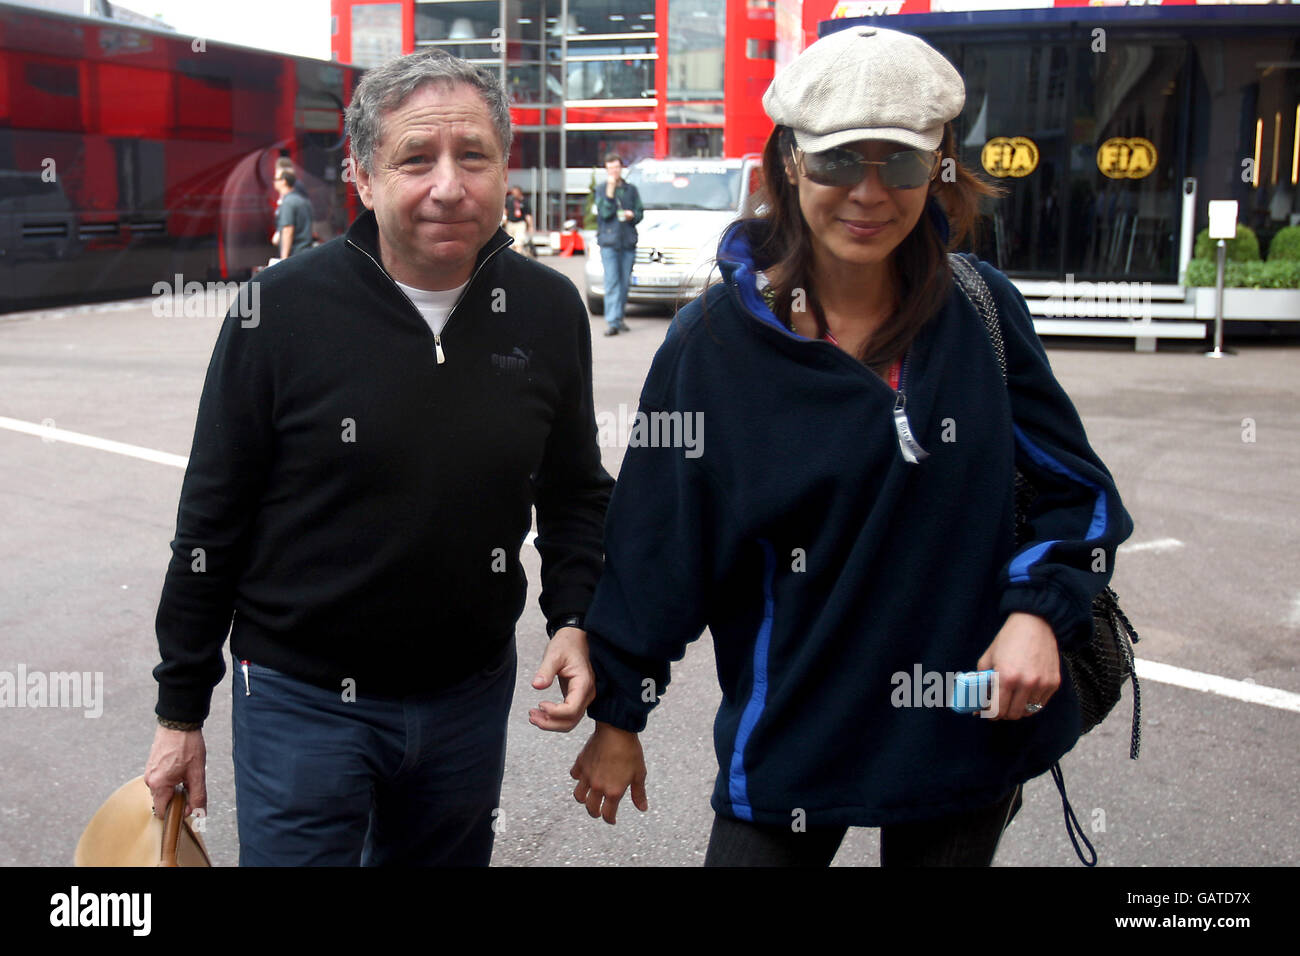 Jean Todt (l), the executive director of Scuderia Ferrari, and his girlfriend actress Michelle Yeoh walk about Monaco during the Grand Prix Weekend Stock Photo